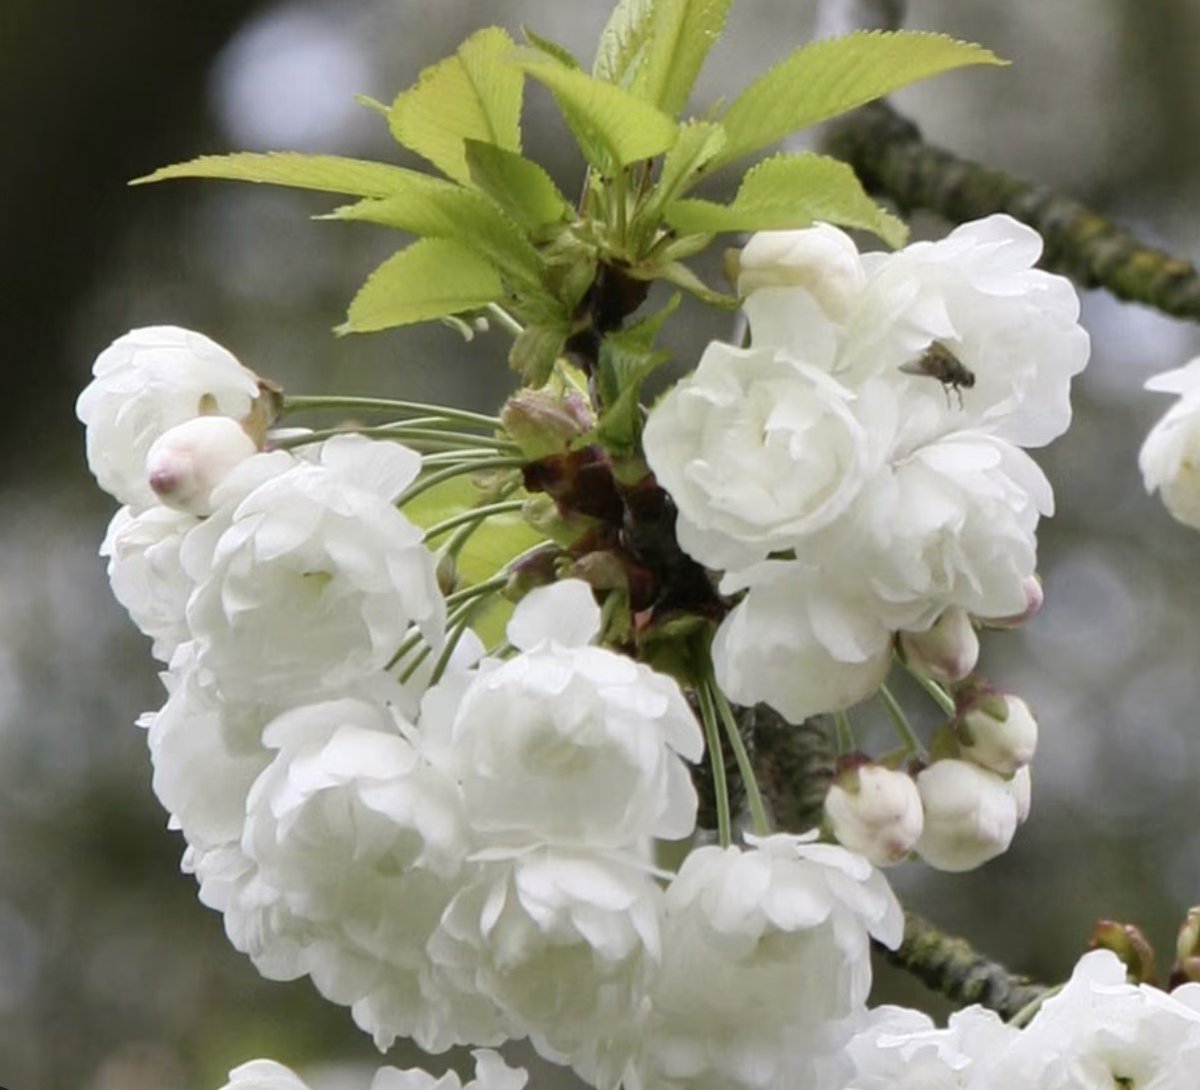 In studies of the flowering phenology of Japanese Cherries these two mark the middle of the 'Mid' season. Prunus 'Kanzan' (left) flowers just before P. avium 'Plena'. Things like P. x yedoensis and P. 'Shirotate' are distant memories now.